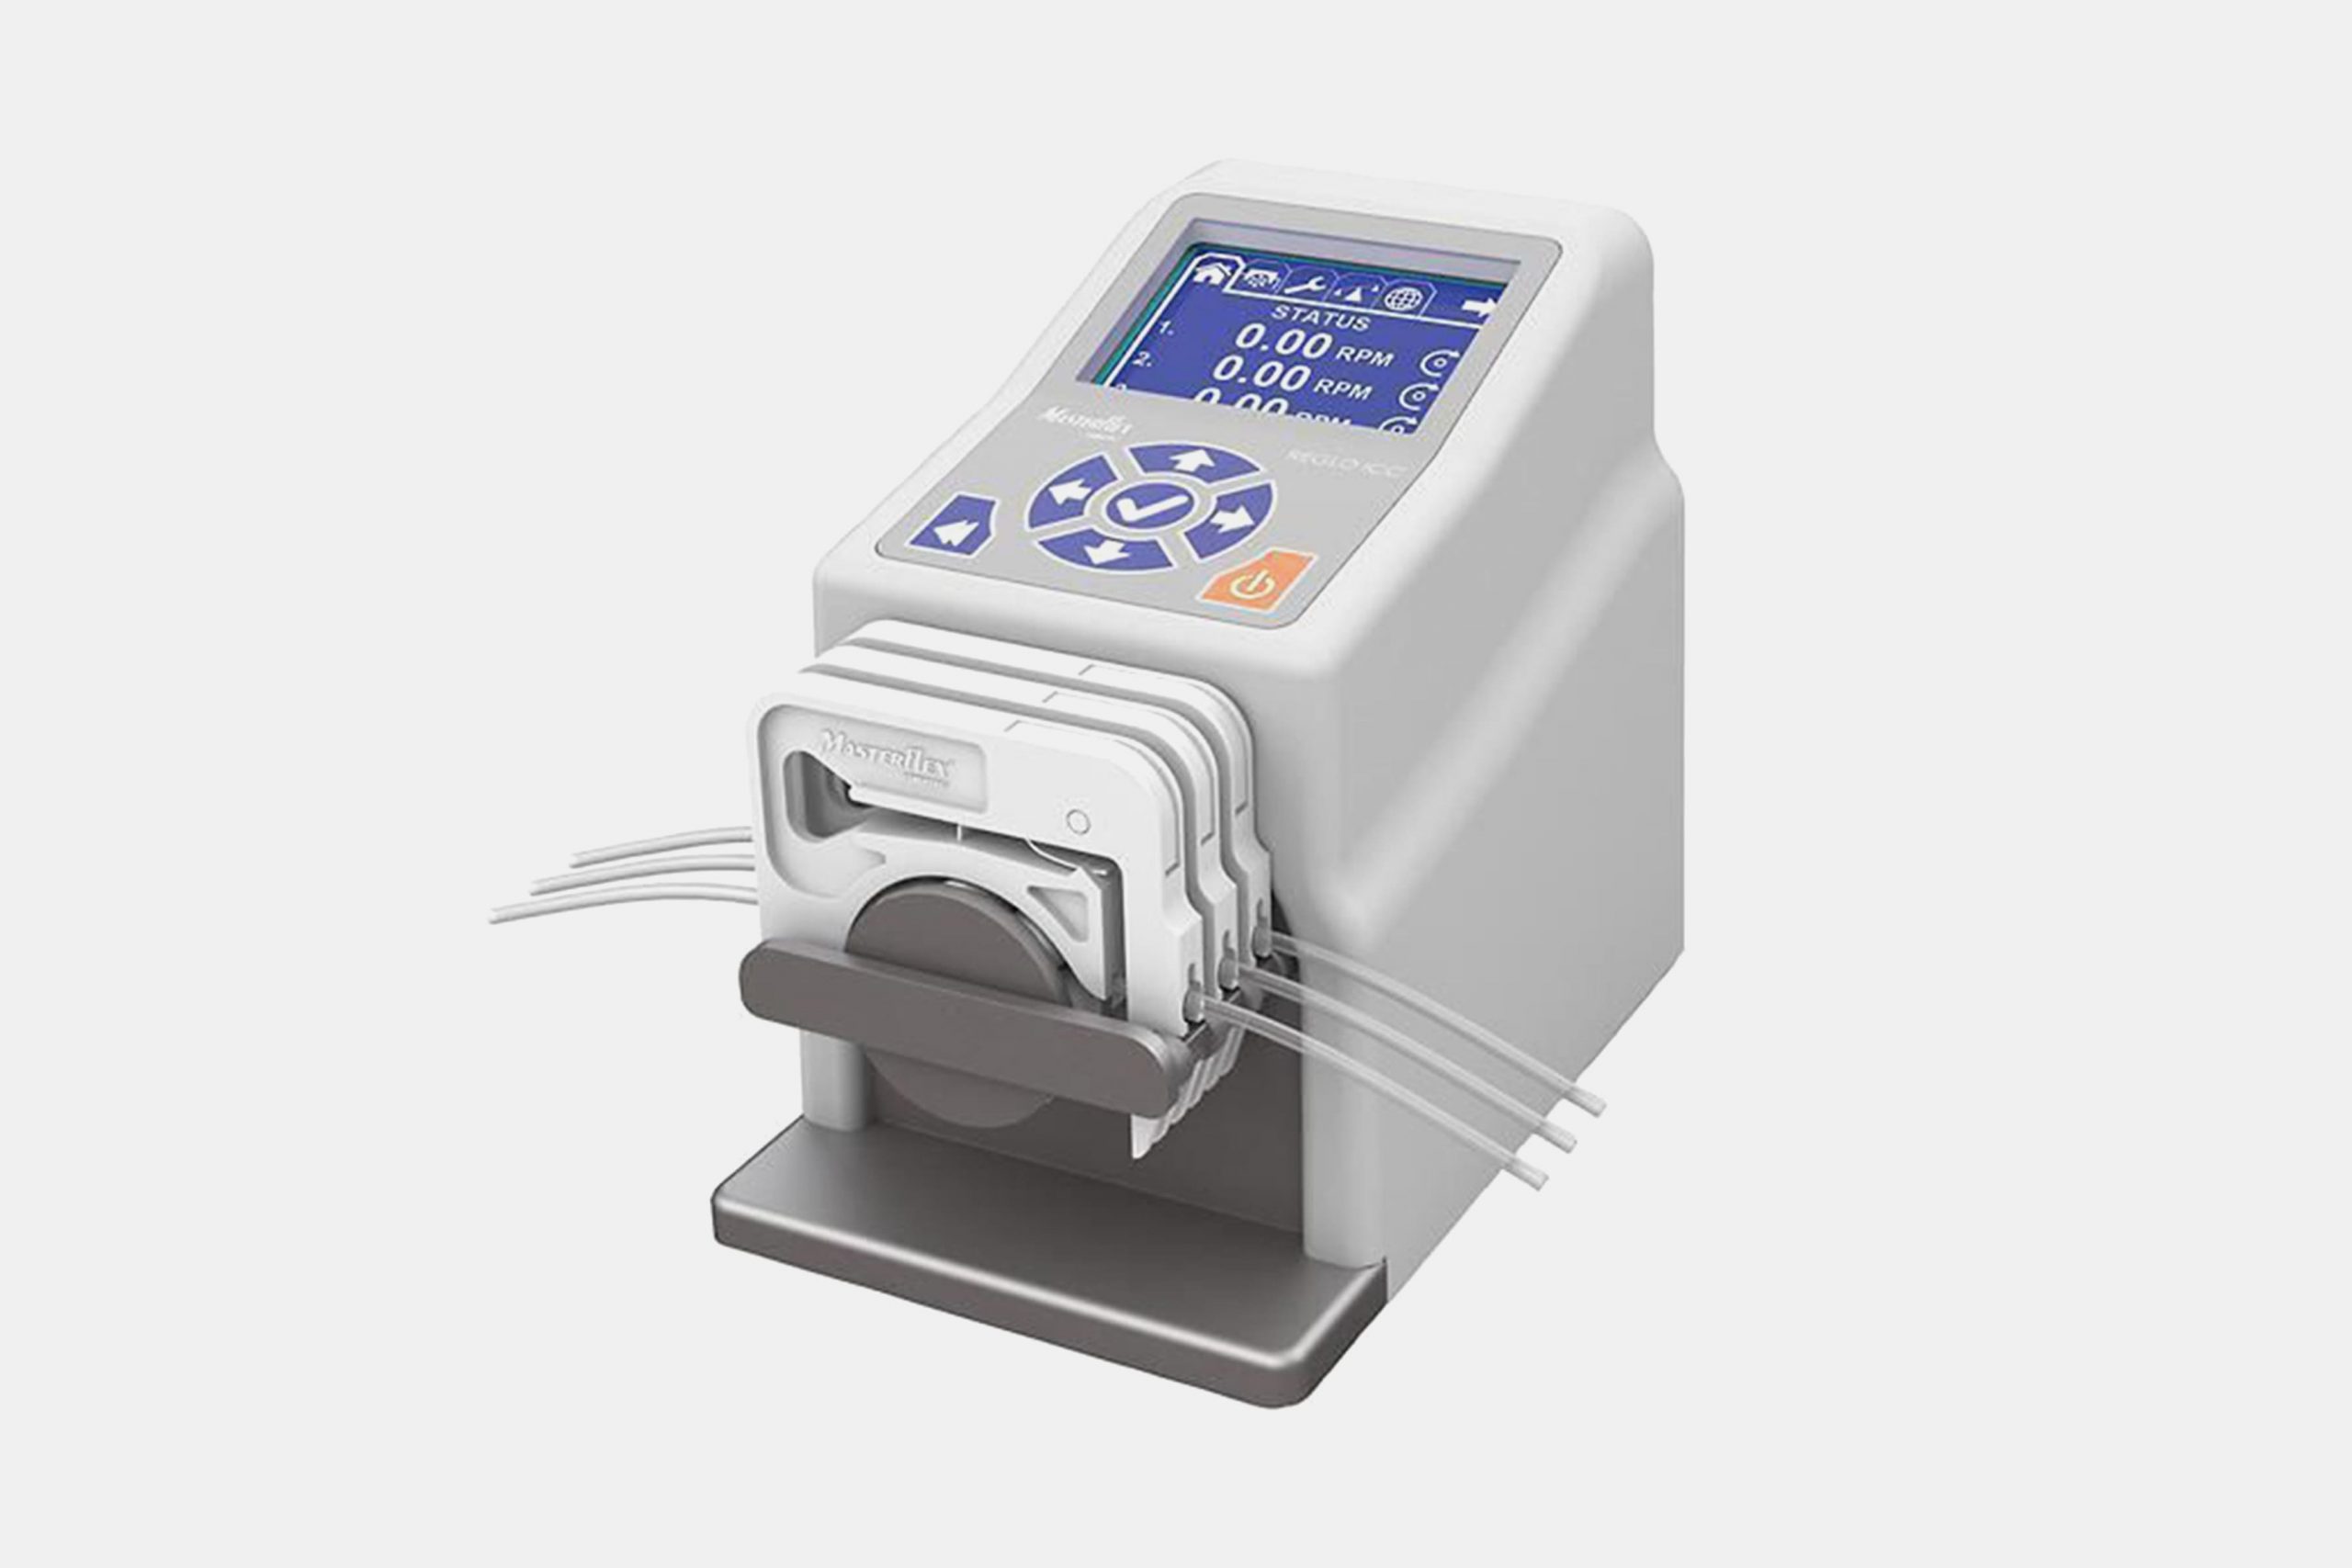 INDEPENDENT CHANNEL CONTROL (ICC) PERISTALTIC PUMPS